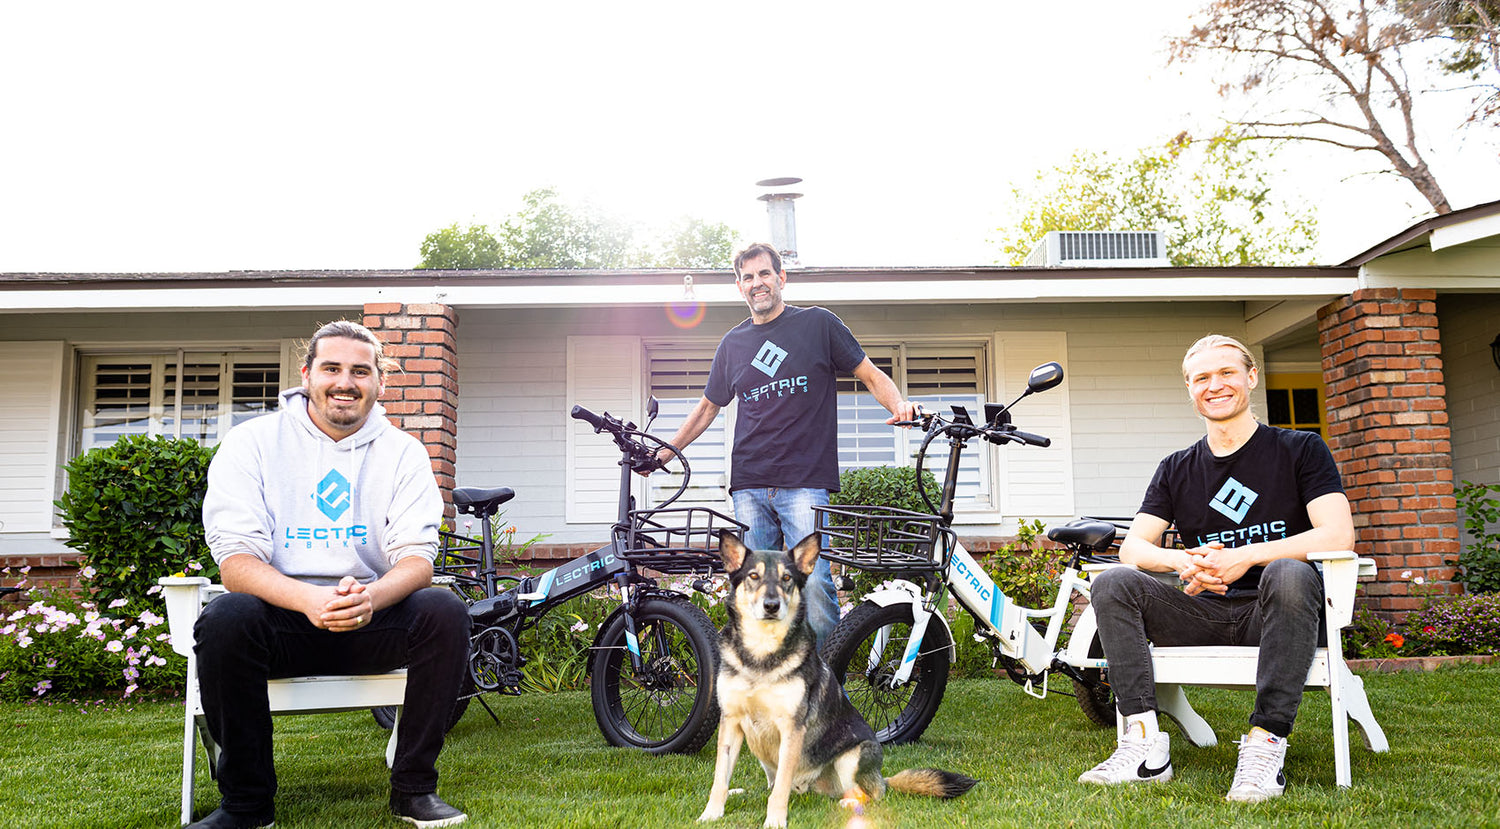 Lectric eBike Founders in Yard featuring XP 2.0 eBikes